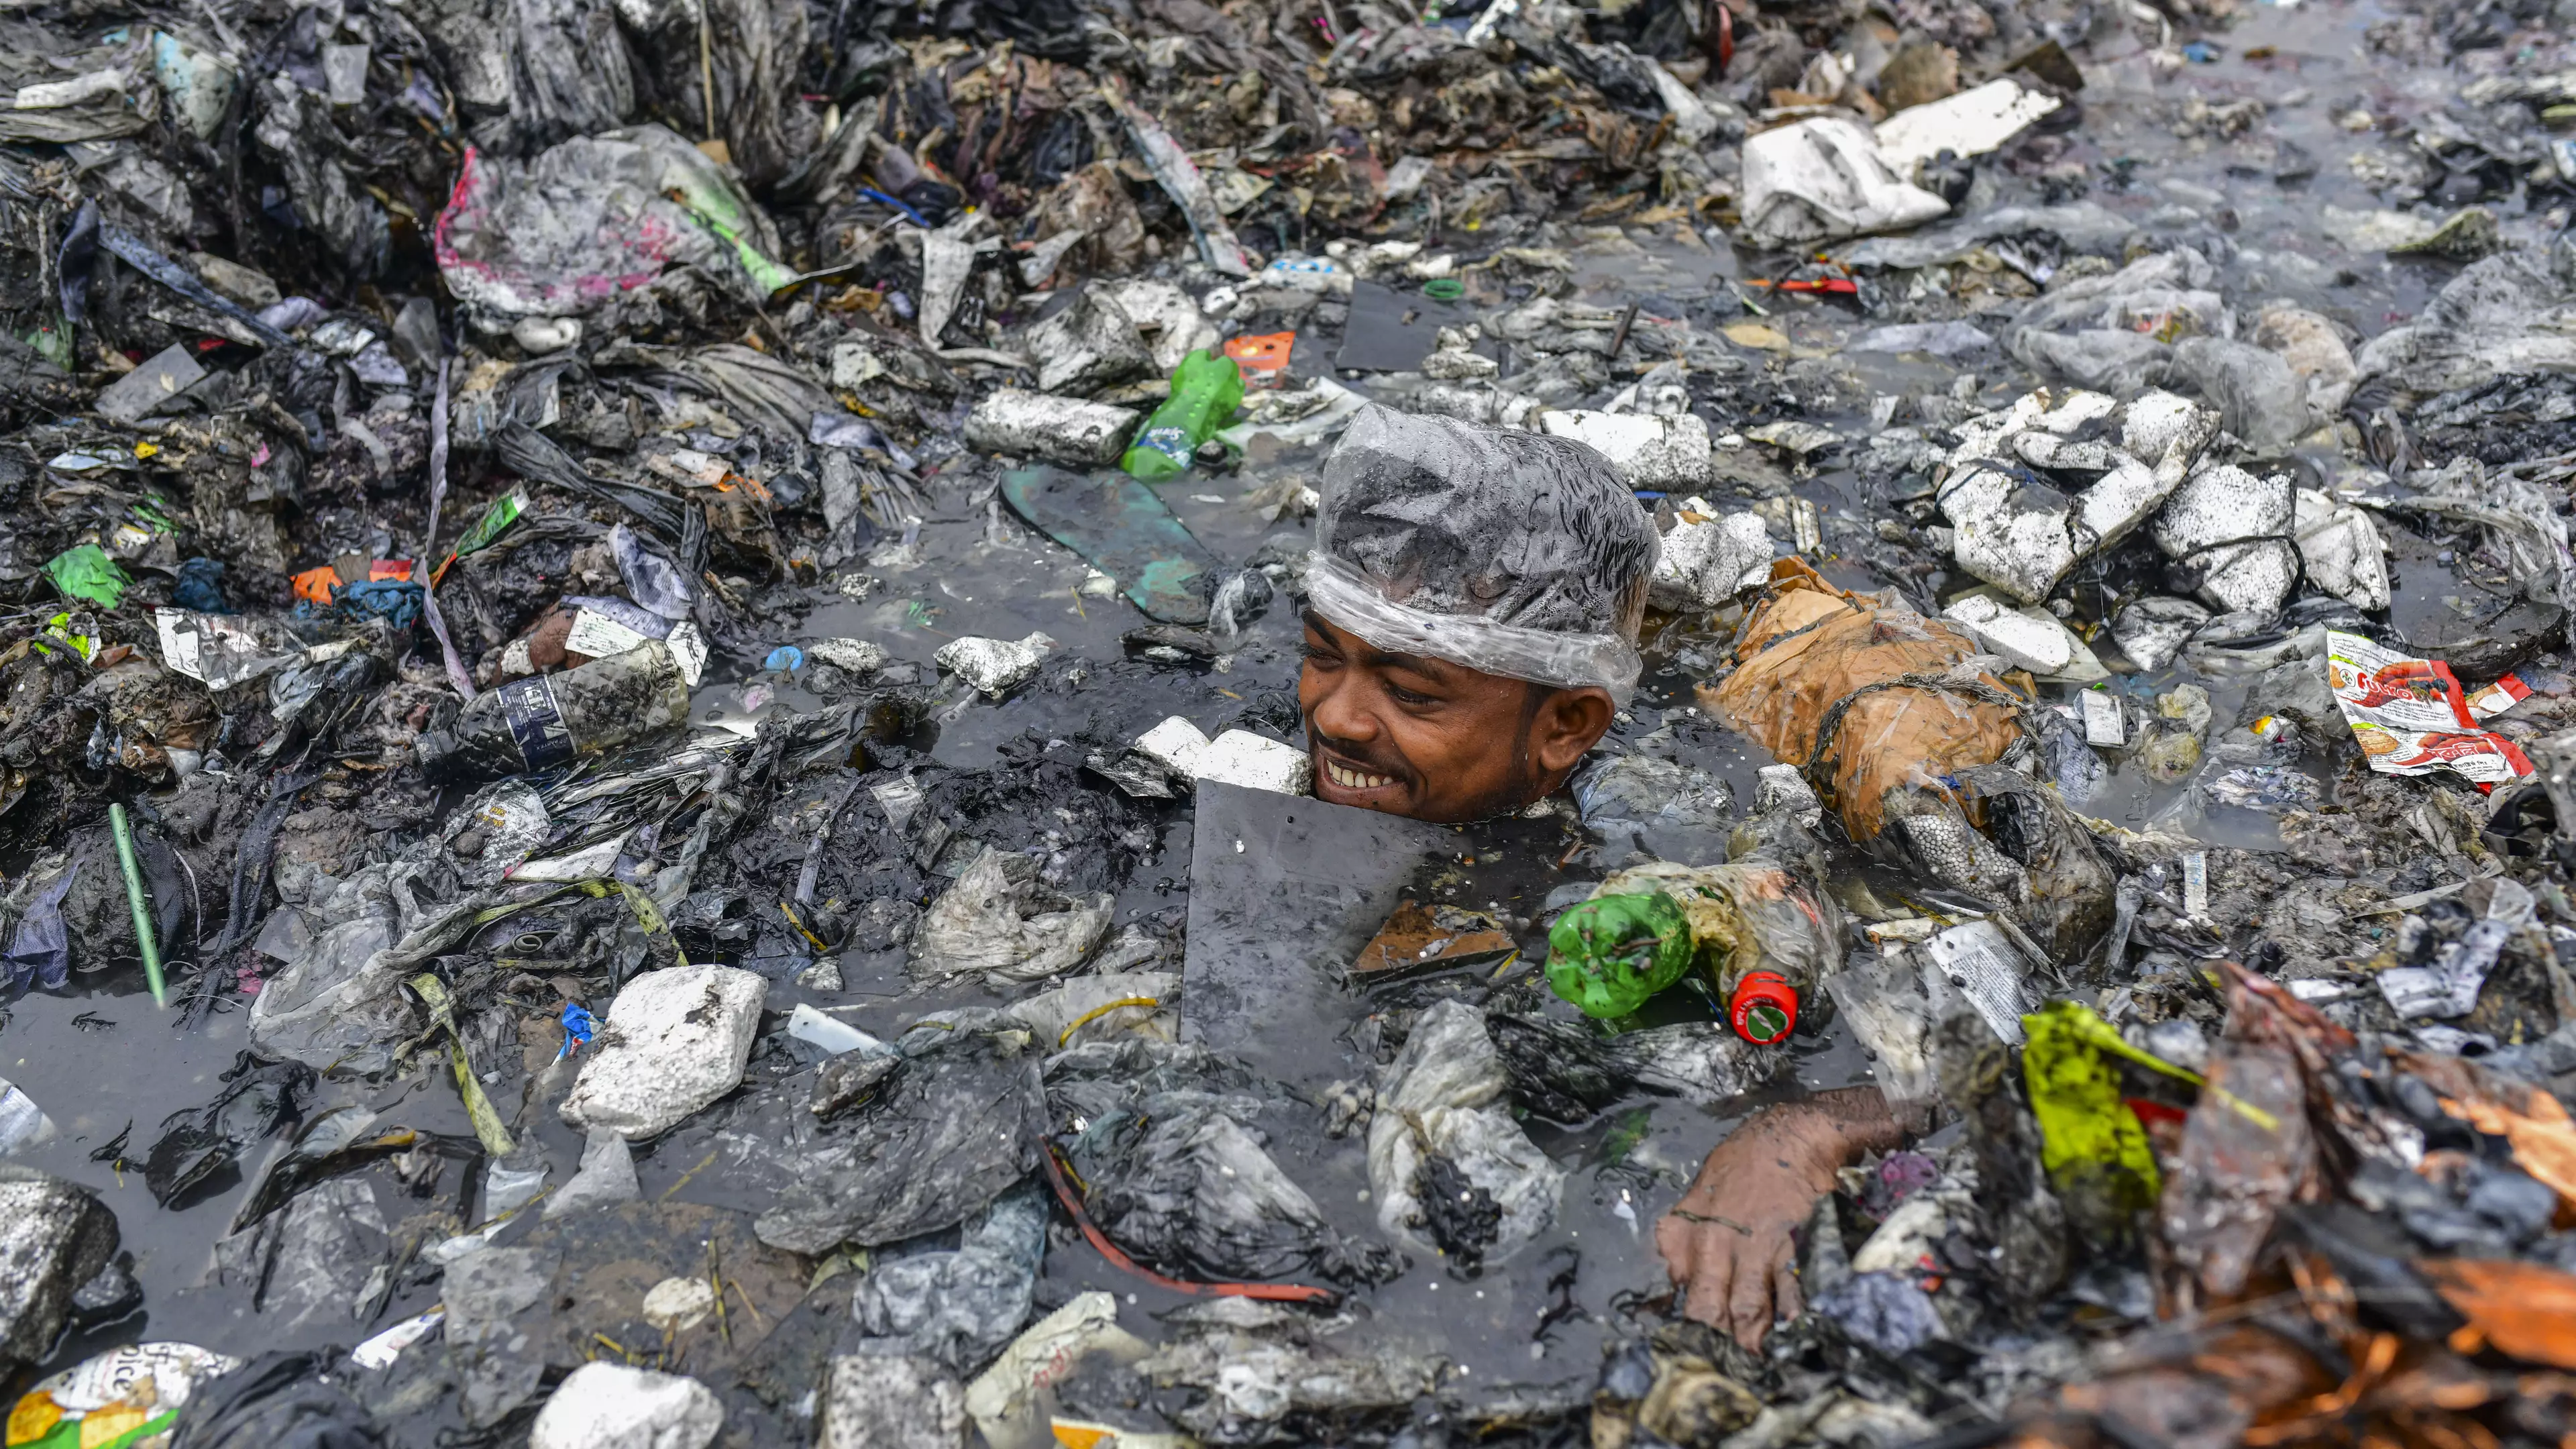 Bangladesh Street Cleaners Wearing Just Plastic Hats As PPE Swim Up To Their Necks In Rubbish